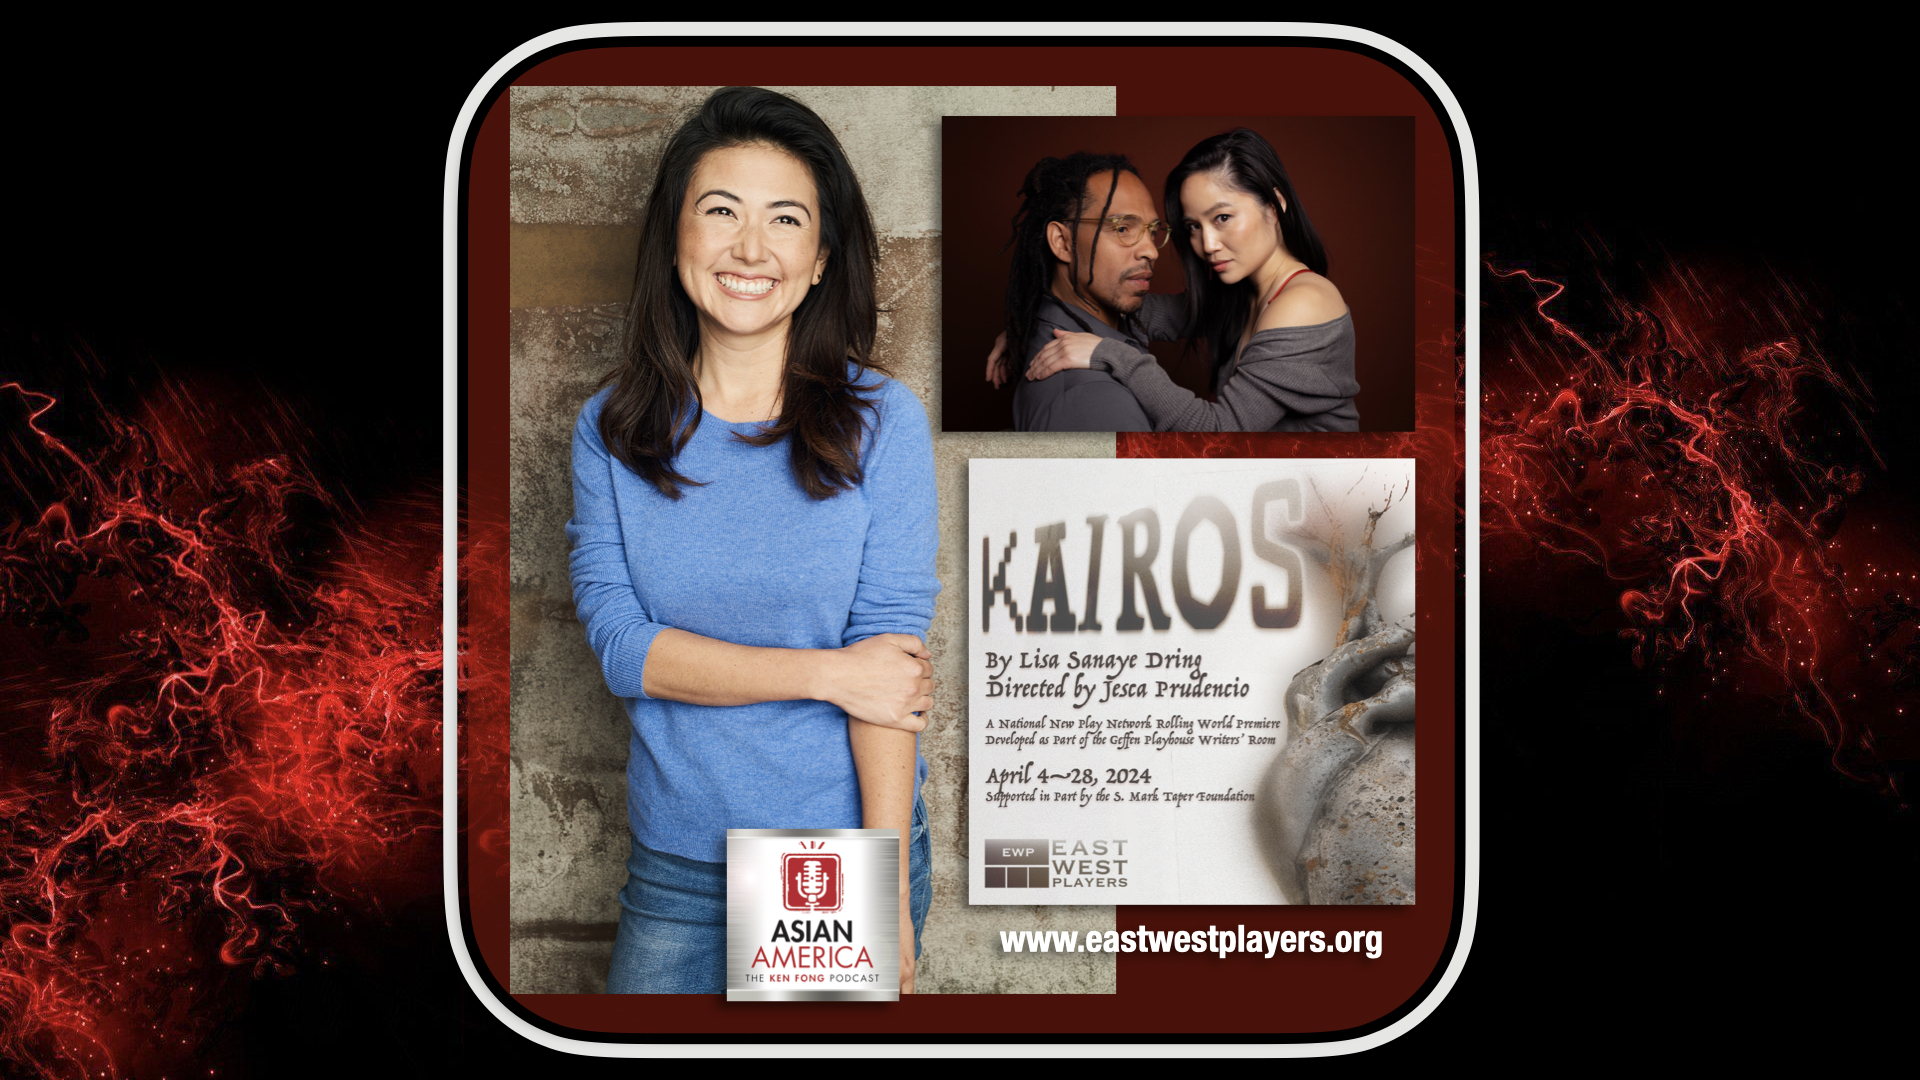 EP 470: Lisa Sanaye Dring On Her New Play “Kairos” @ East West Players Theater